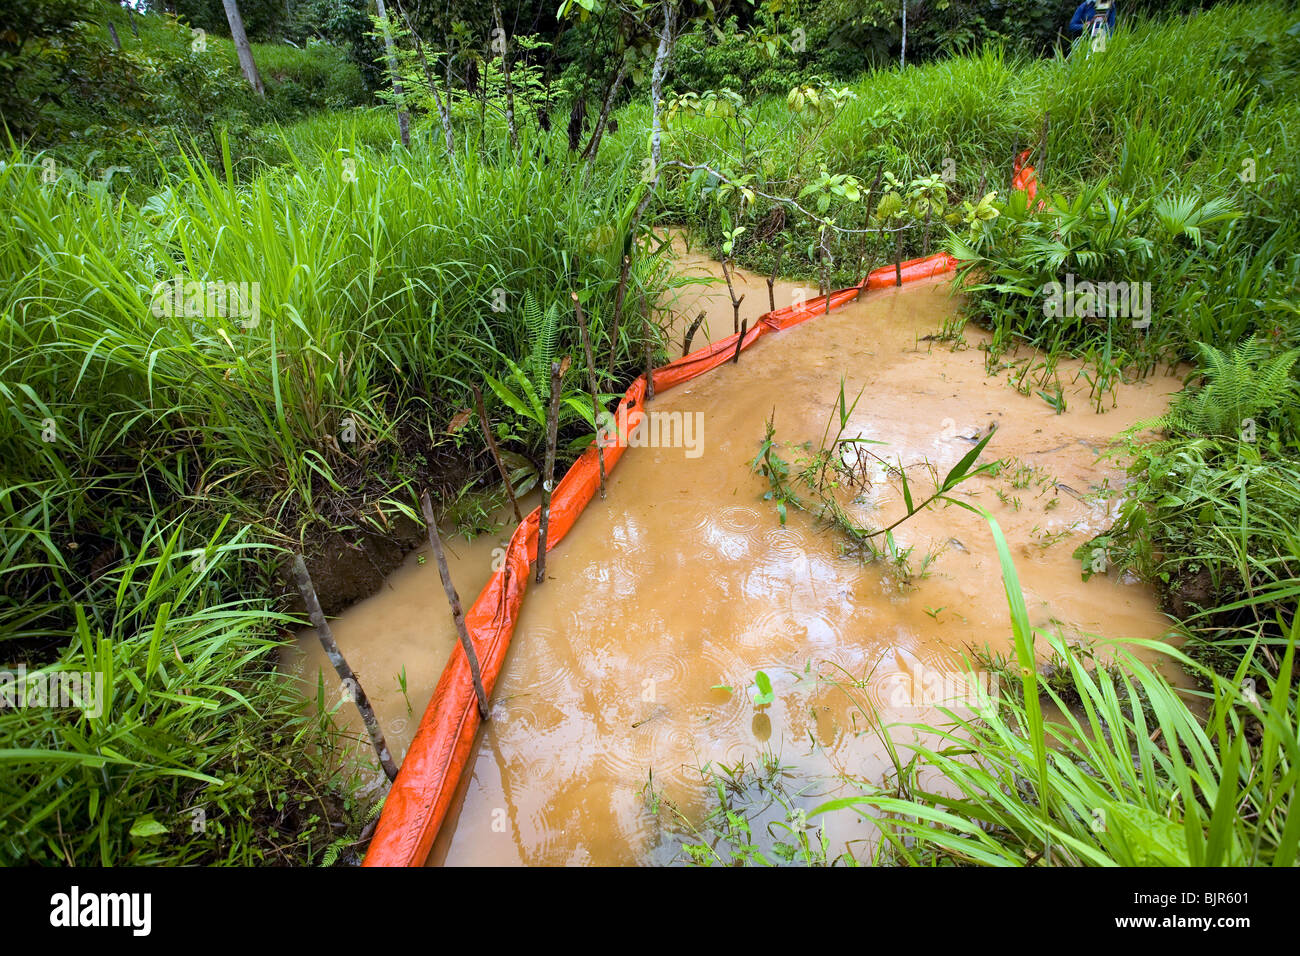 Oil spill in an Amazonian stream with boom in position to contain slick. Stock Photo